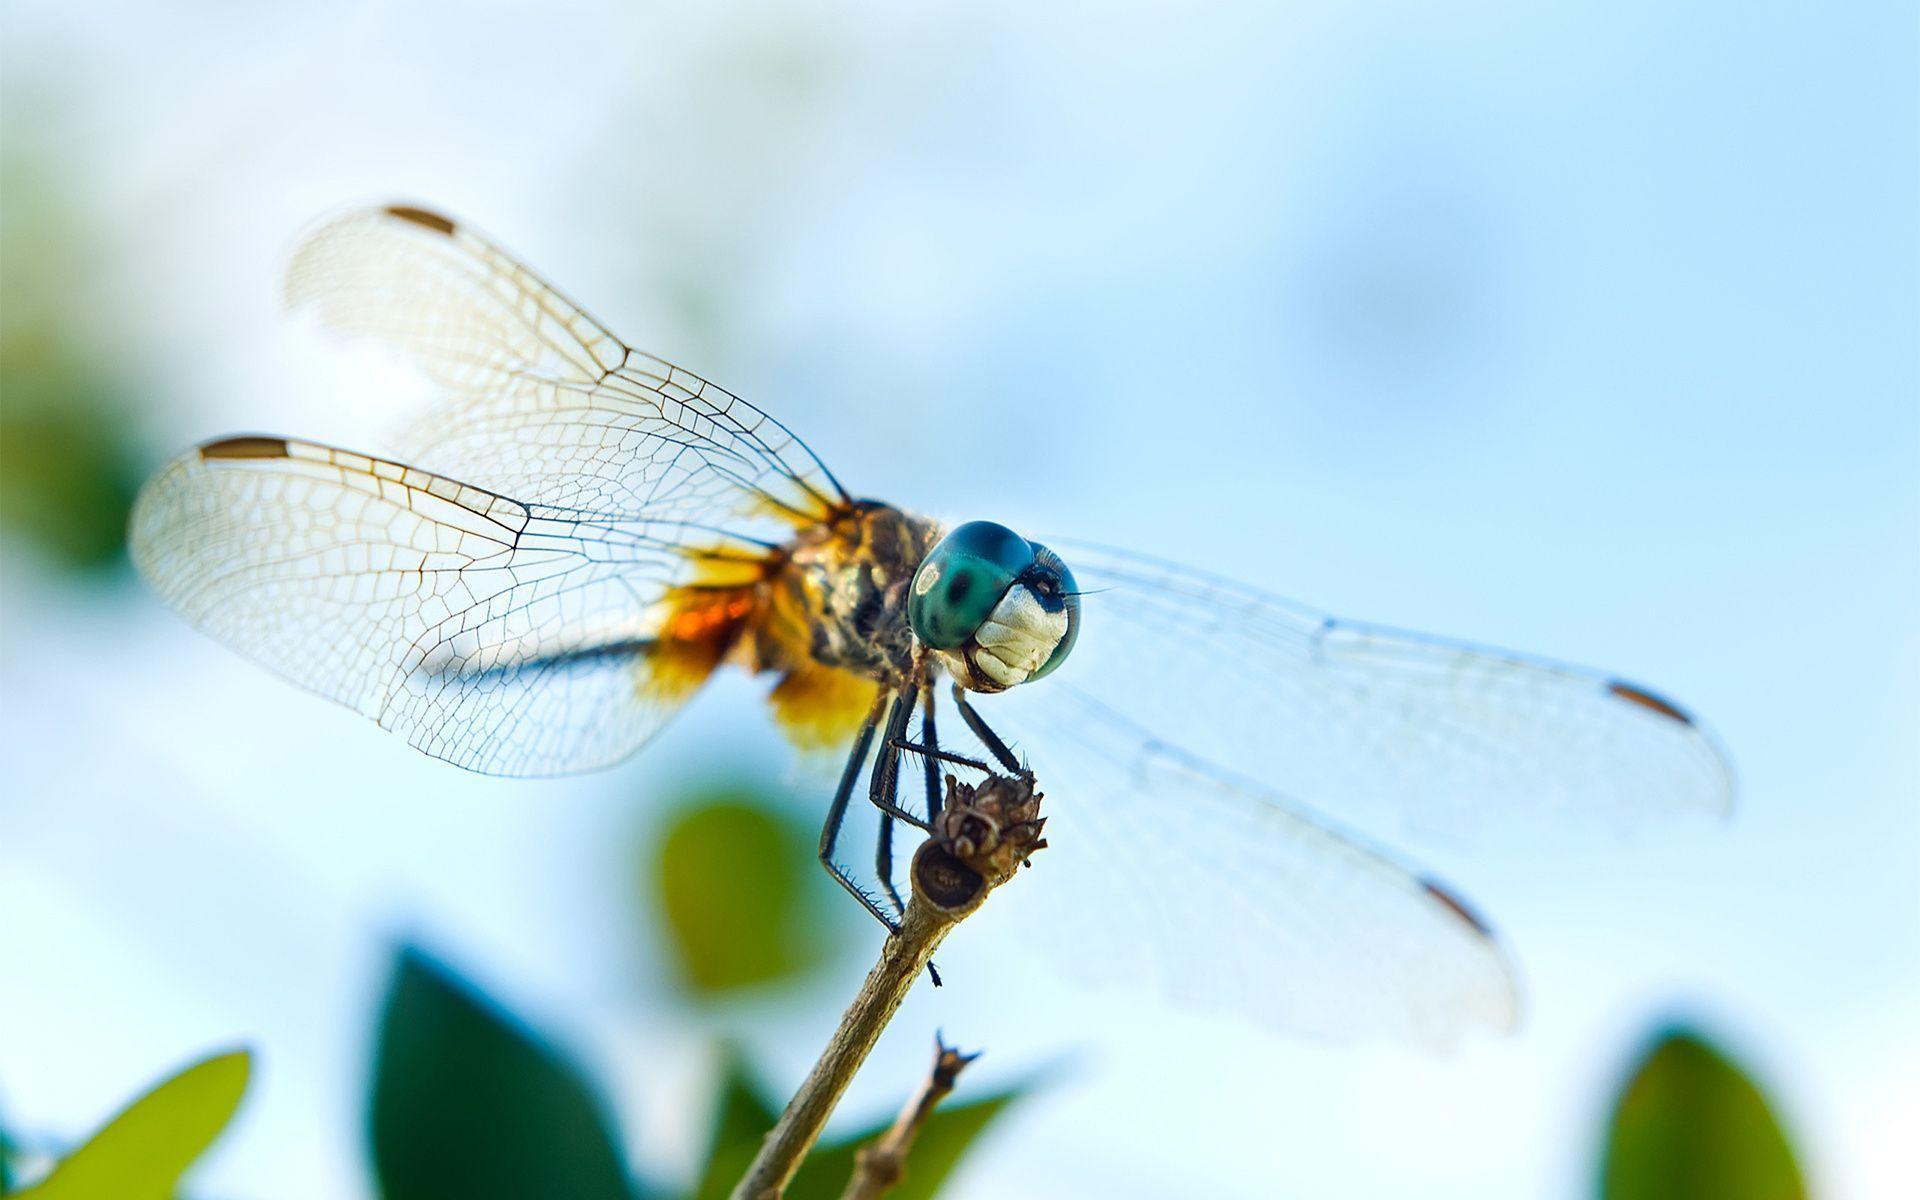 Awesome Dragonfly Wallpaper 39236 1920x1200 px HDWallSource